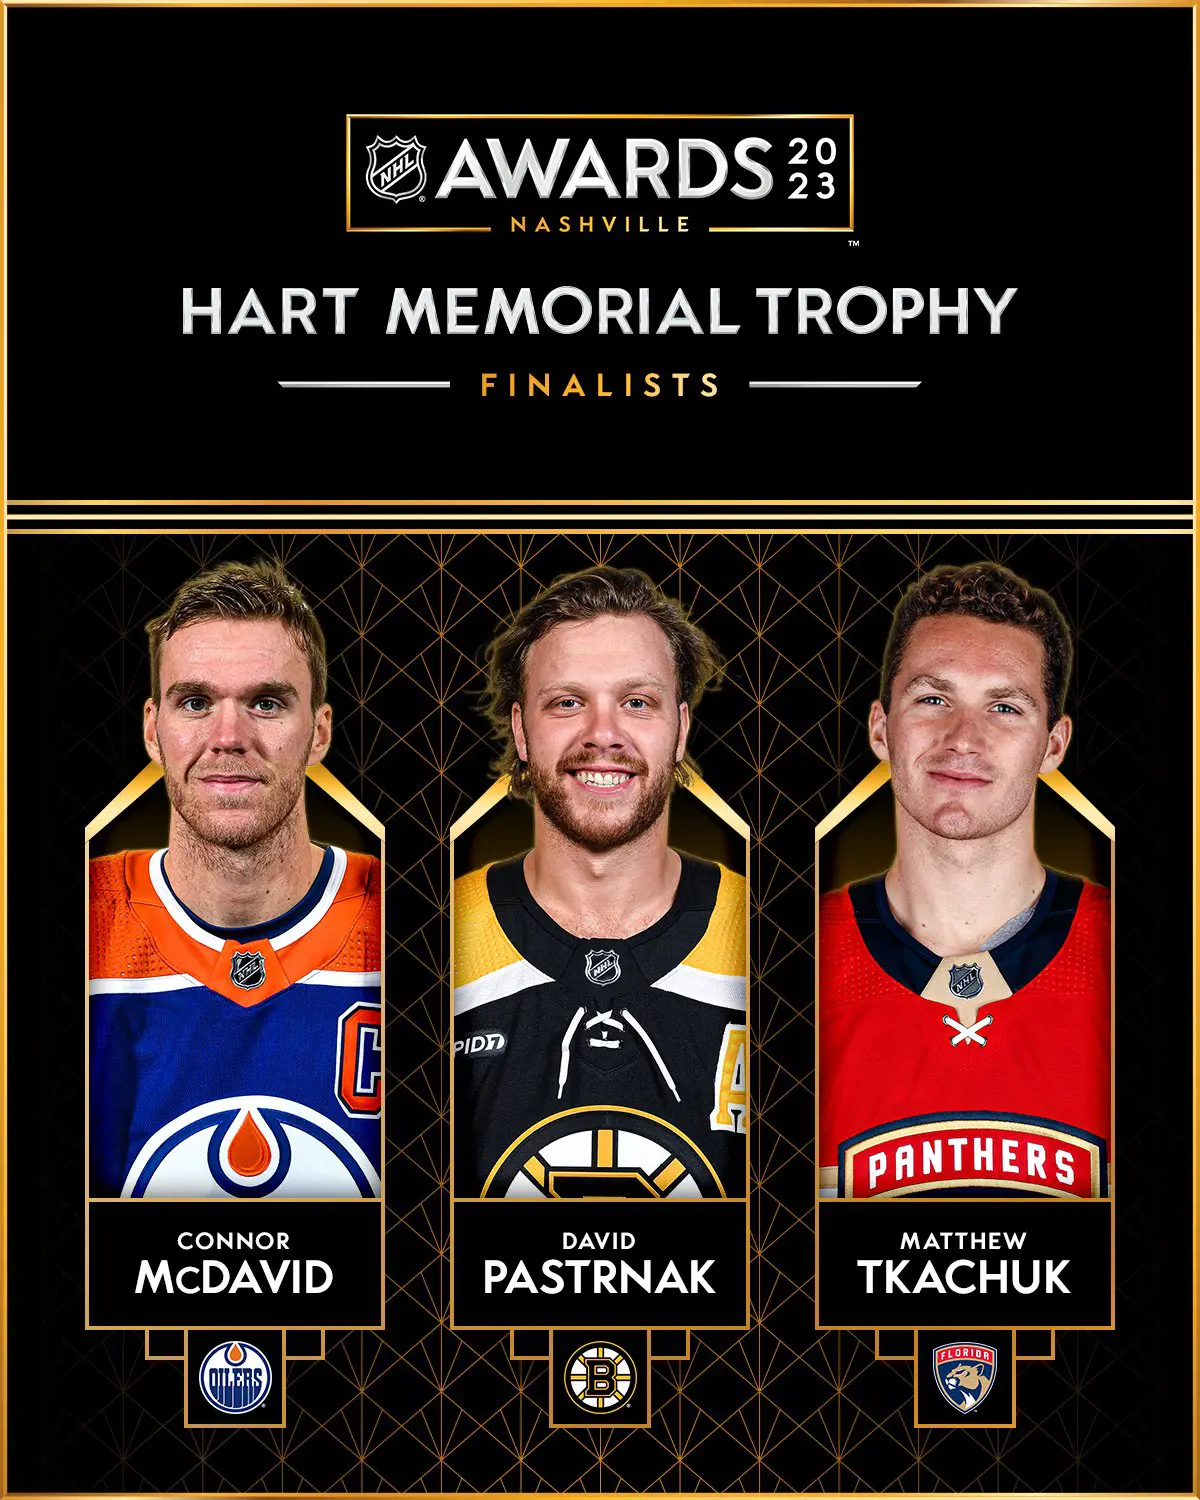 NHL declares the finalists of the Hart Memorial Trophy for the 2022-23 season to be McDavid, Pastrnak and Tkachuk.